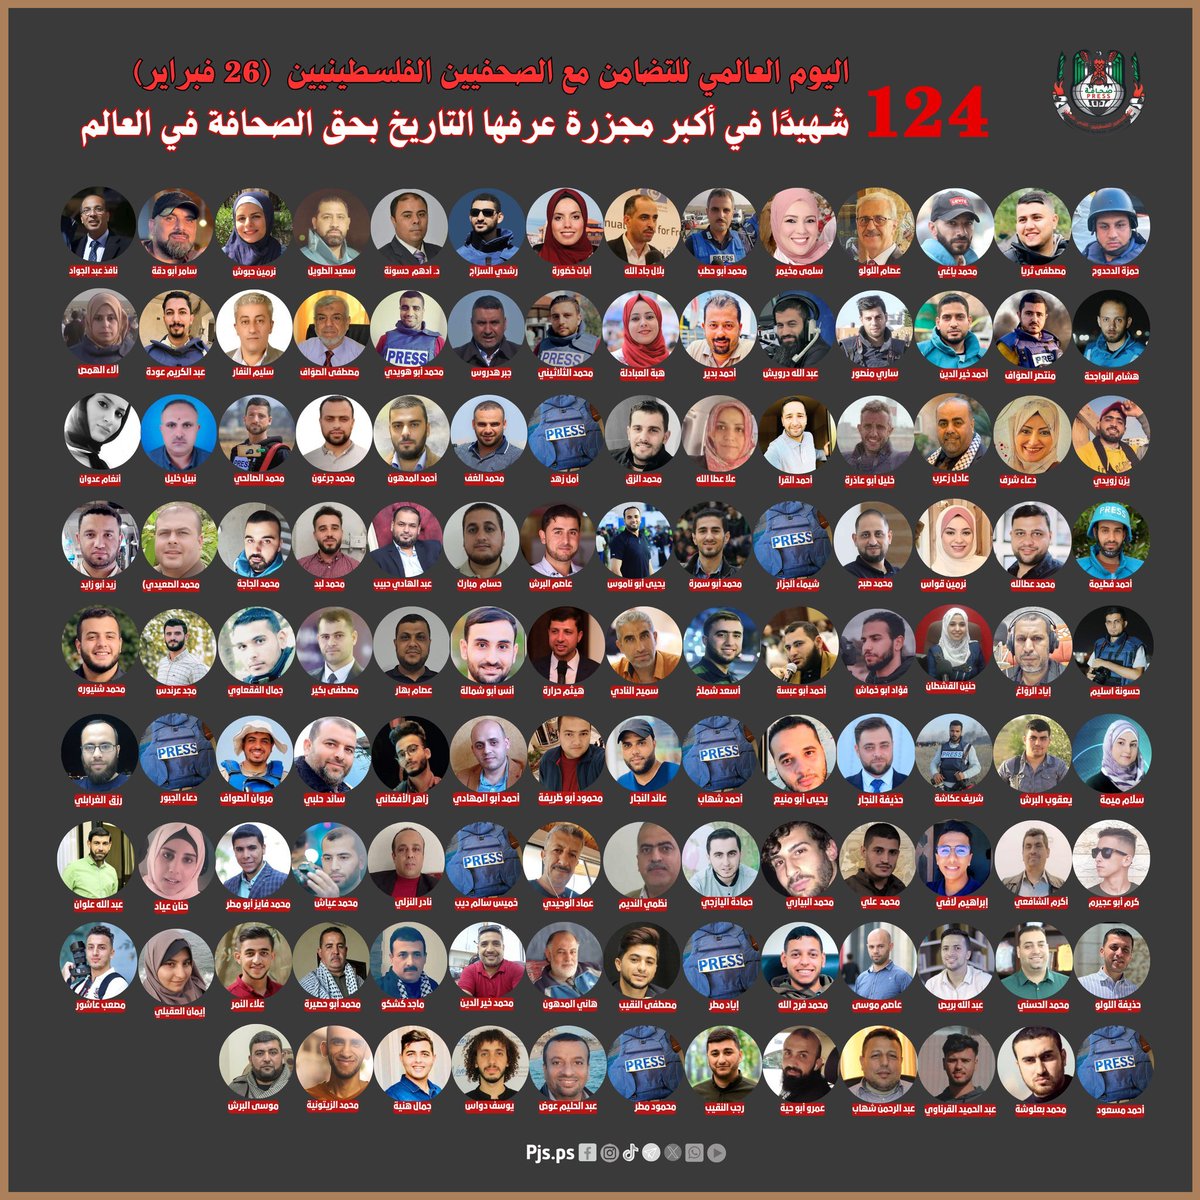 #WorldPressFreedomDay: Israel slaughtered over TWICE as many journalists in Gaza in 6 months (140) than those killed in all 6 years of WWII (69) or 20 years of the Vietnam war (63) & mainstream media is systematically downplaying, justifying & covering up Israeli atrocities!